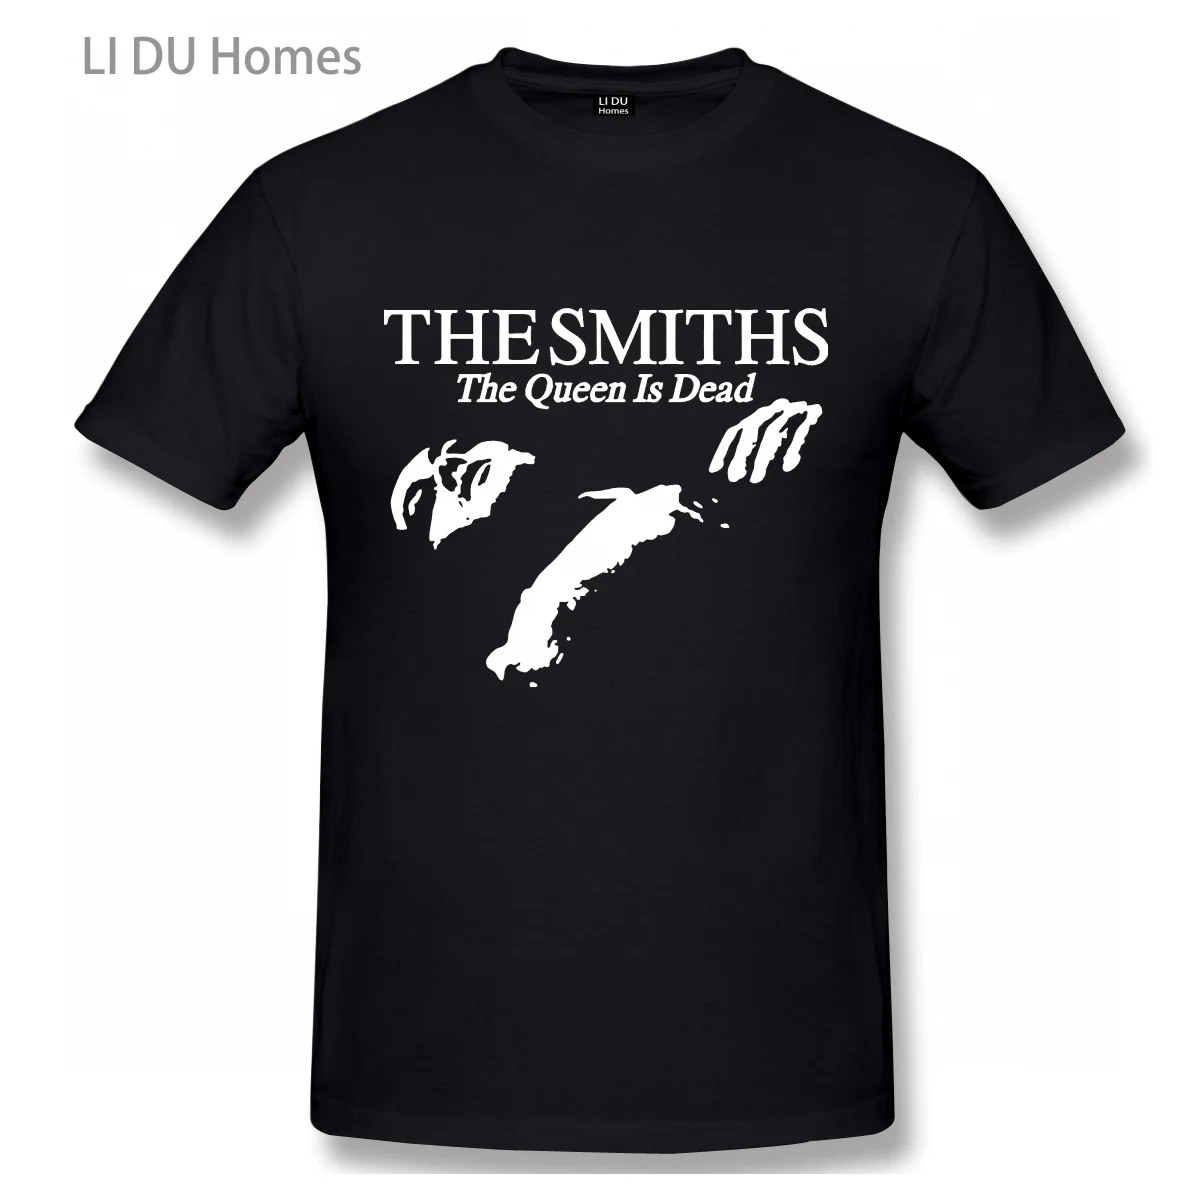 

Men Cotton T Shirt Summer Tops The Smiths The Queen Is Dead - T-Shirt, 1980's Indie, Morrissey Bigger Size Homme T-shirt